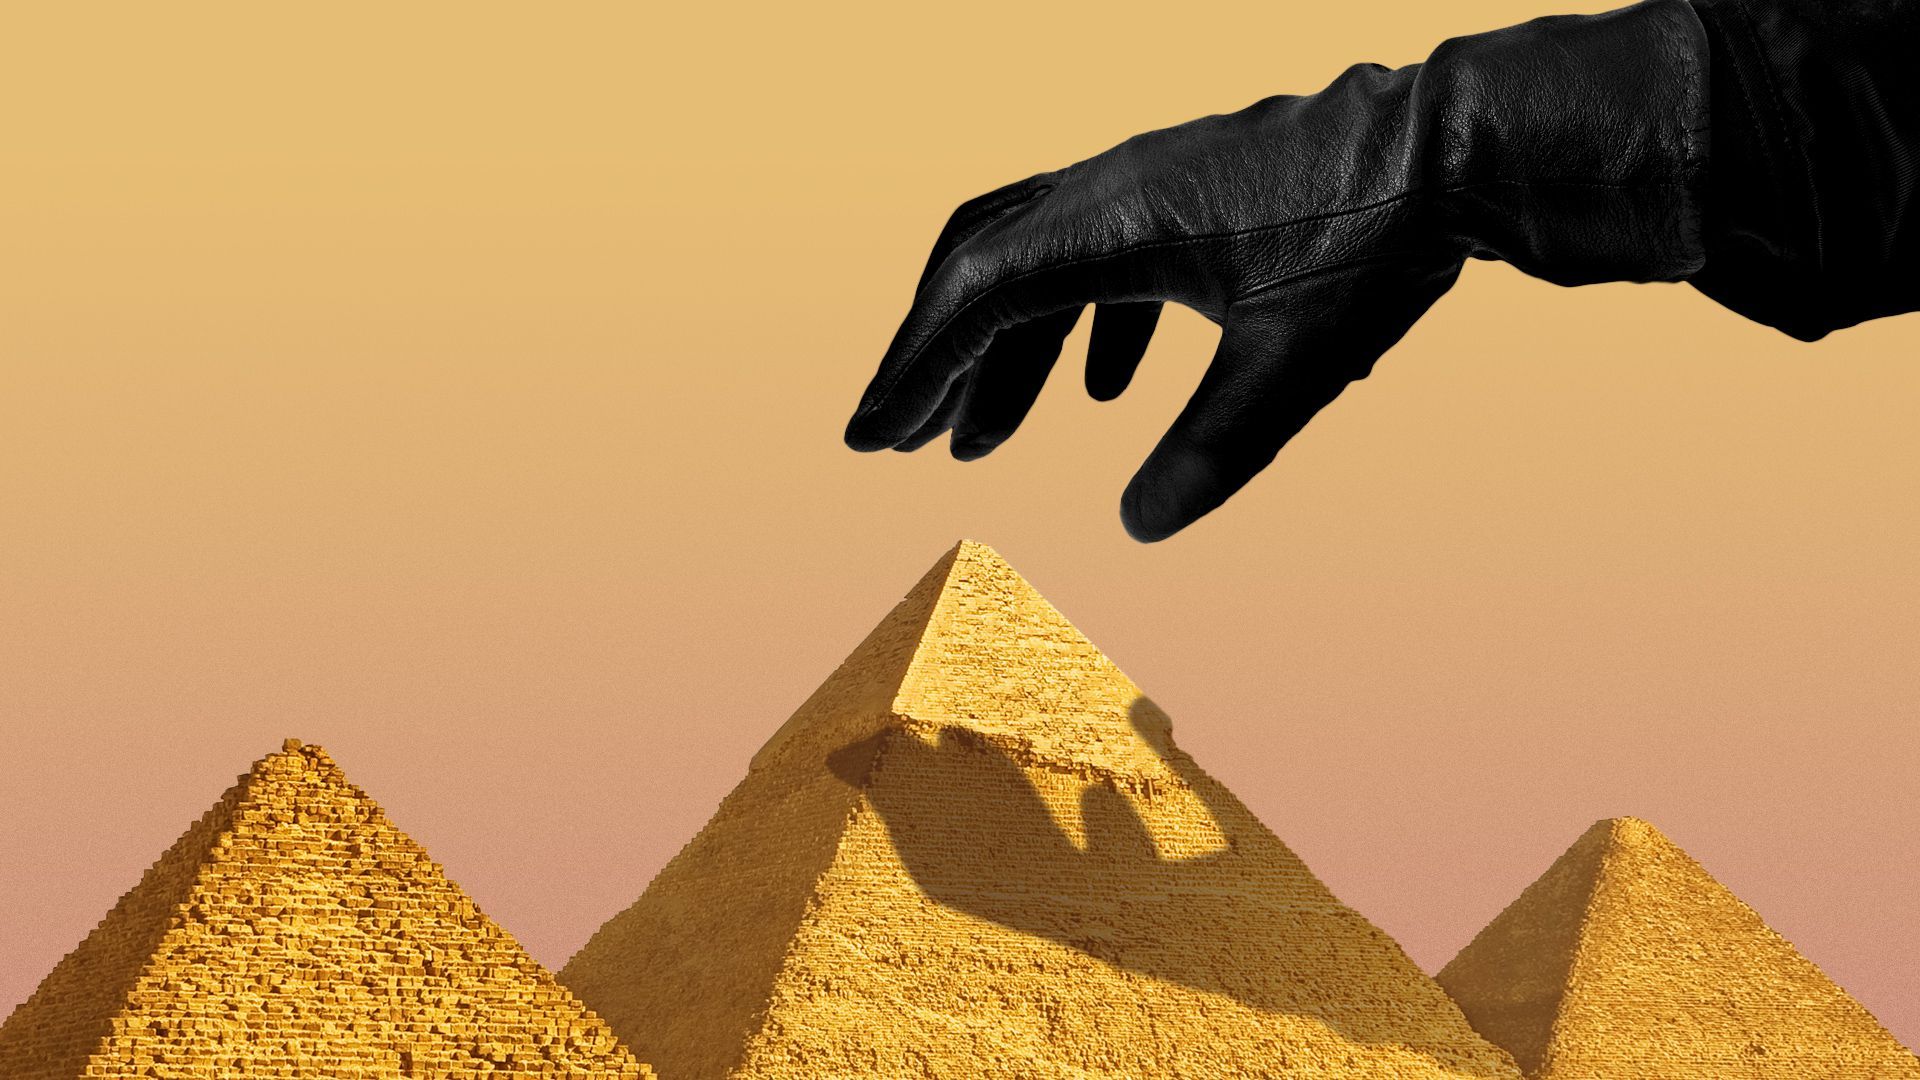 Illustration of a burglar's hand hovering menacingly over the Pyramids of Giza. 